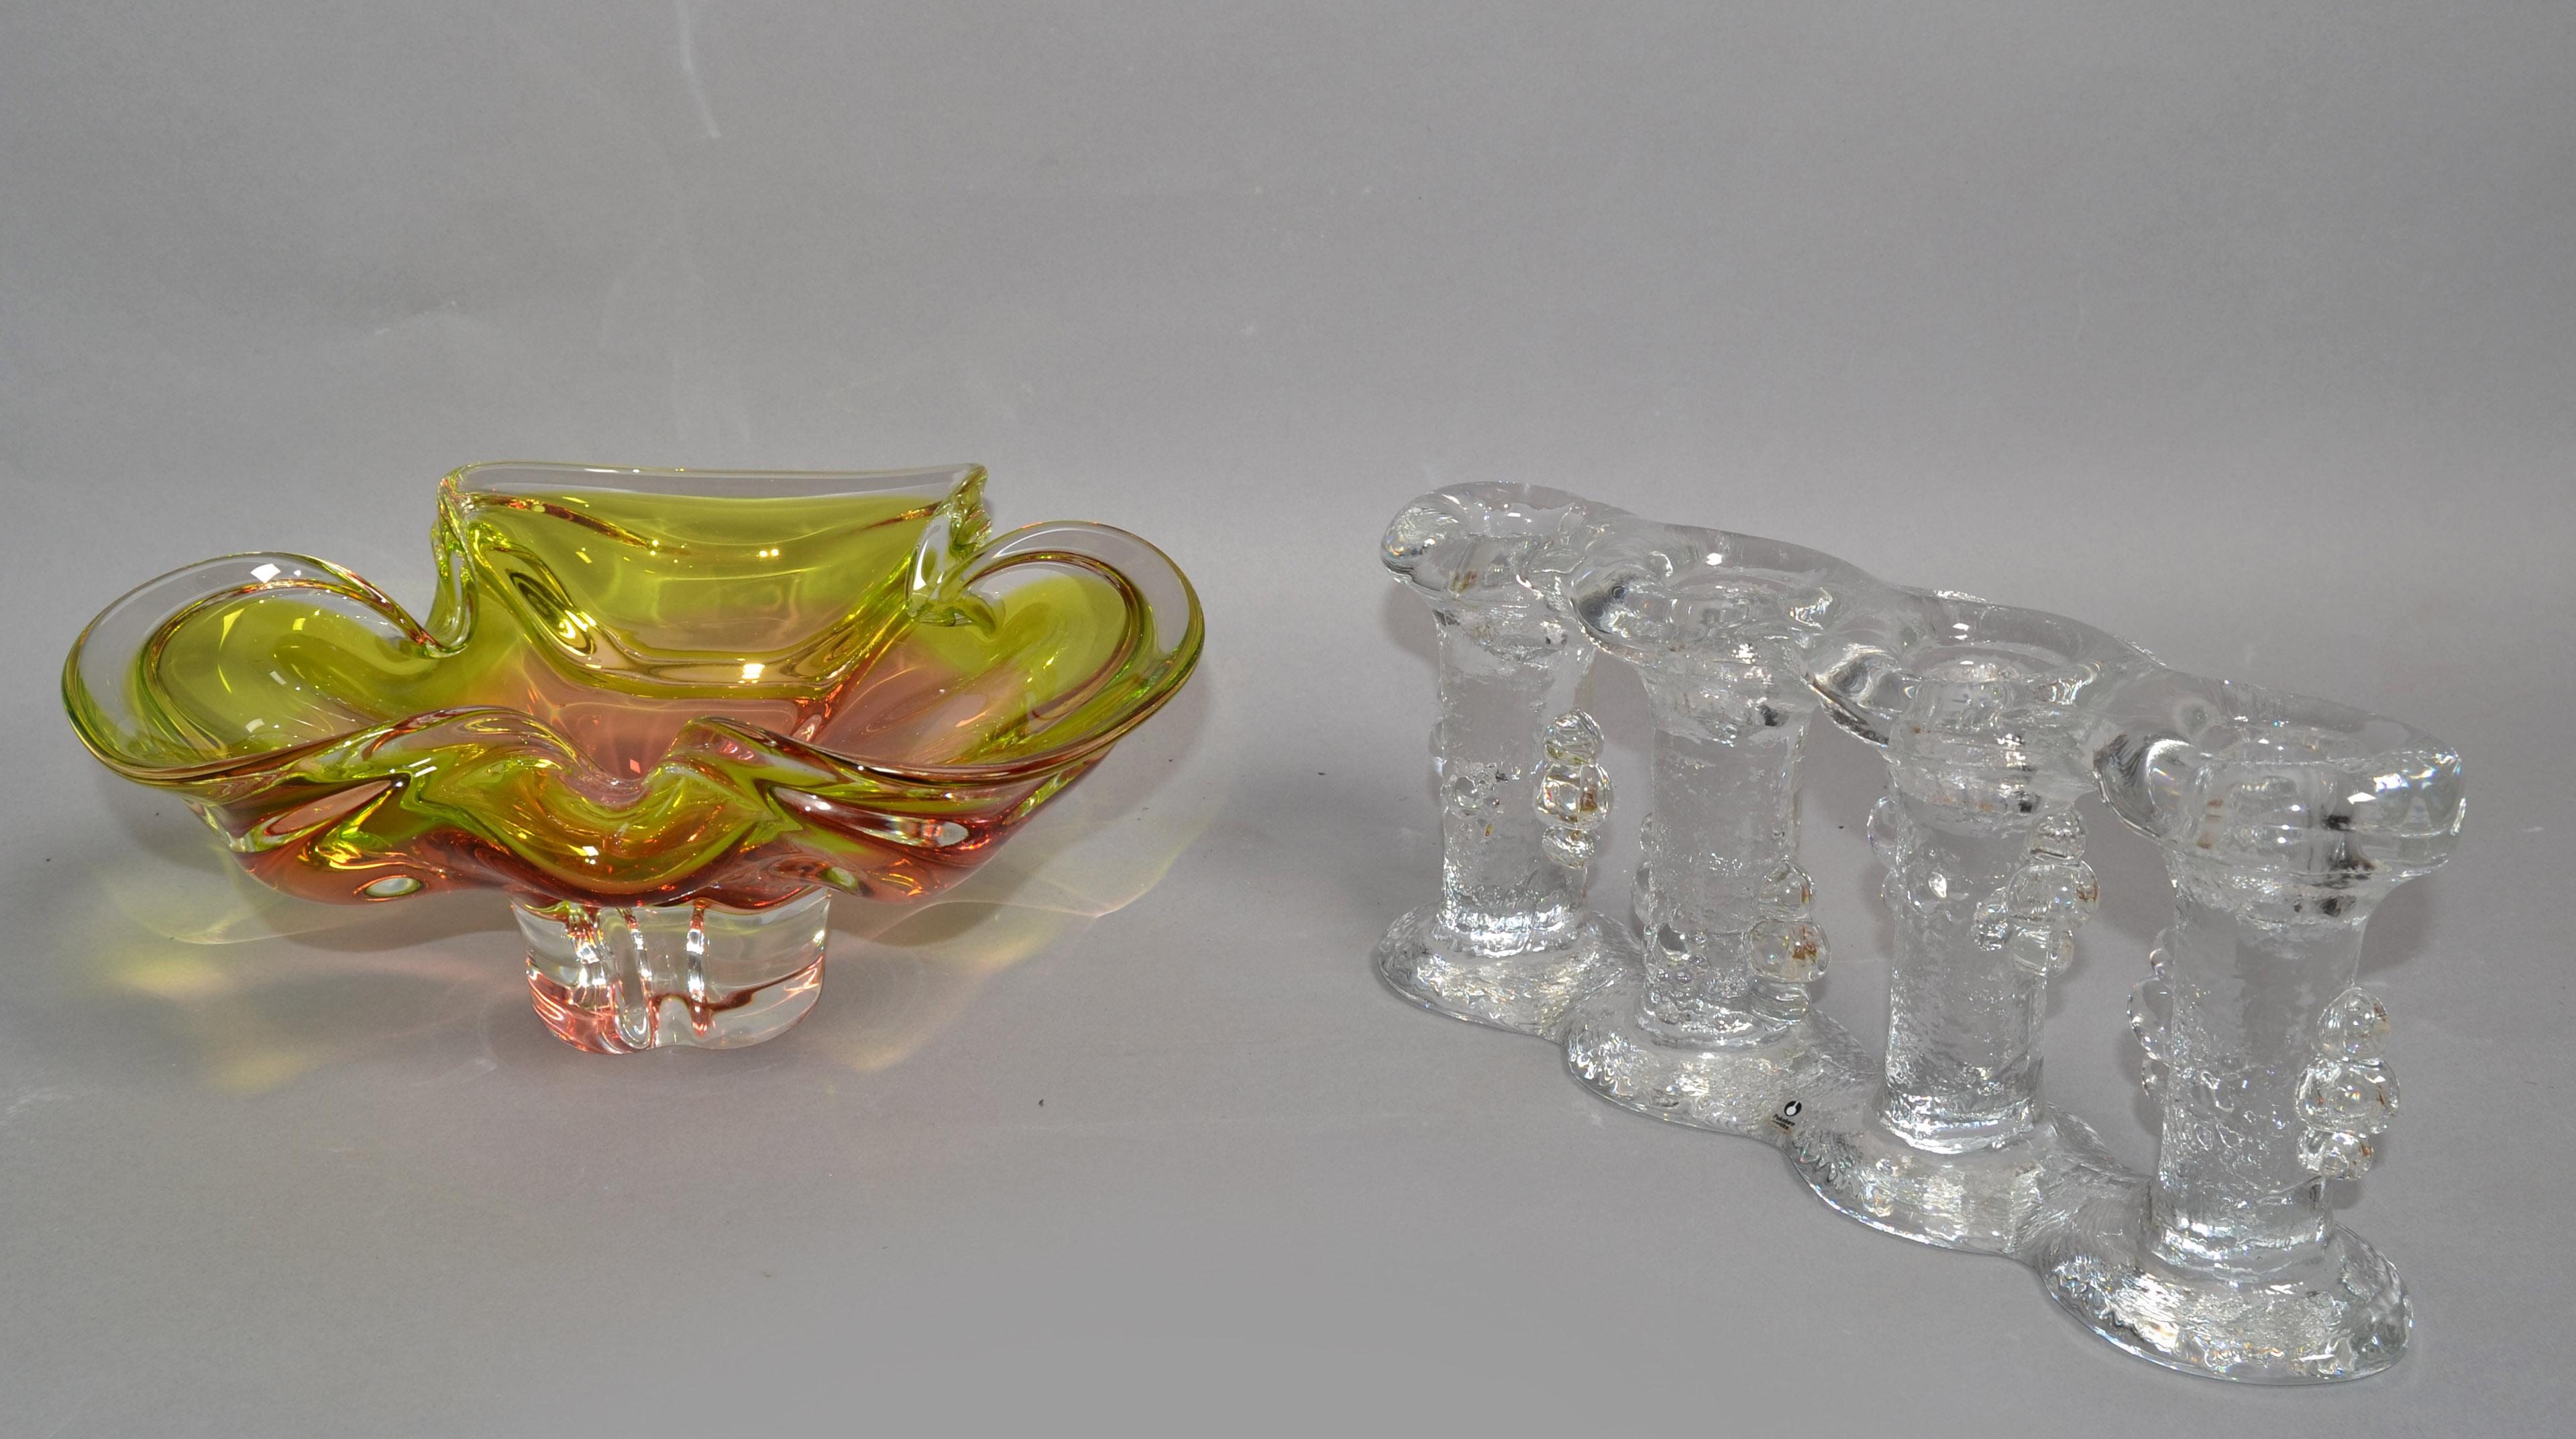 20th Century One Piece 4 Glass Candle Holder by Staffan Gellerstedt for Pukeberg Sweden 1970 For Sale